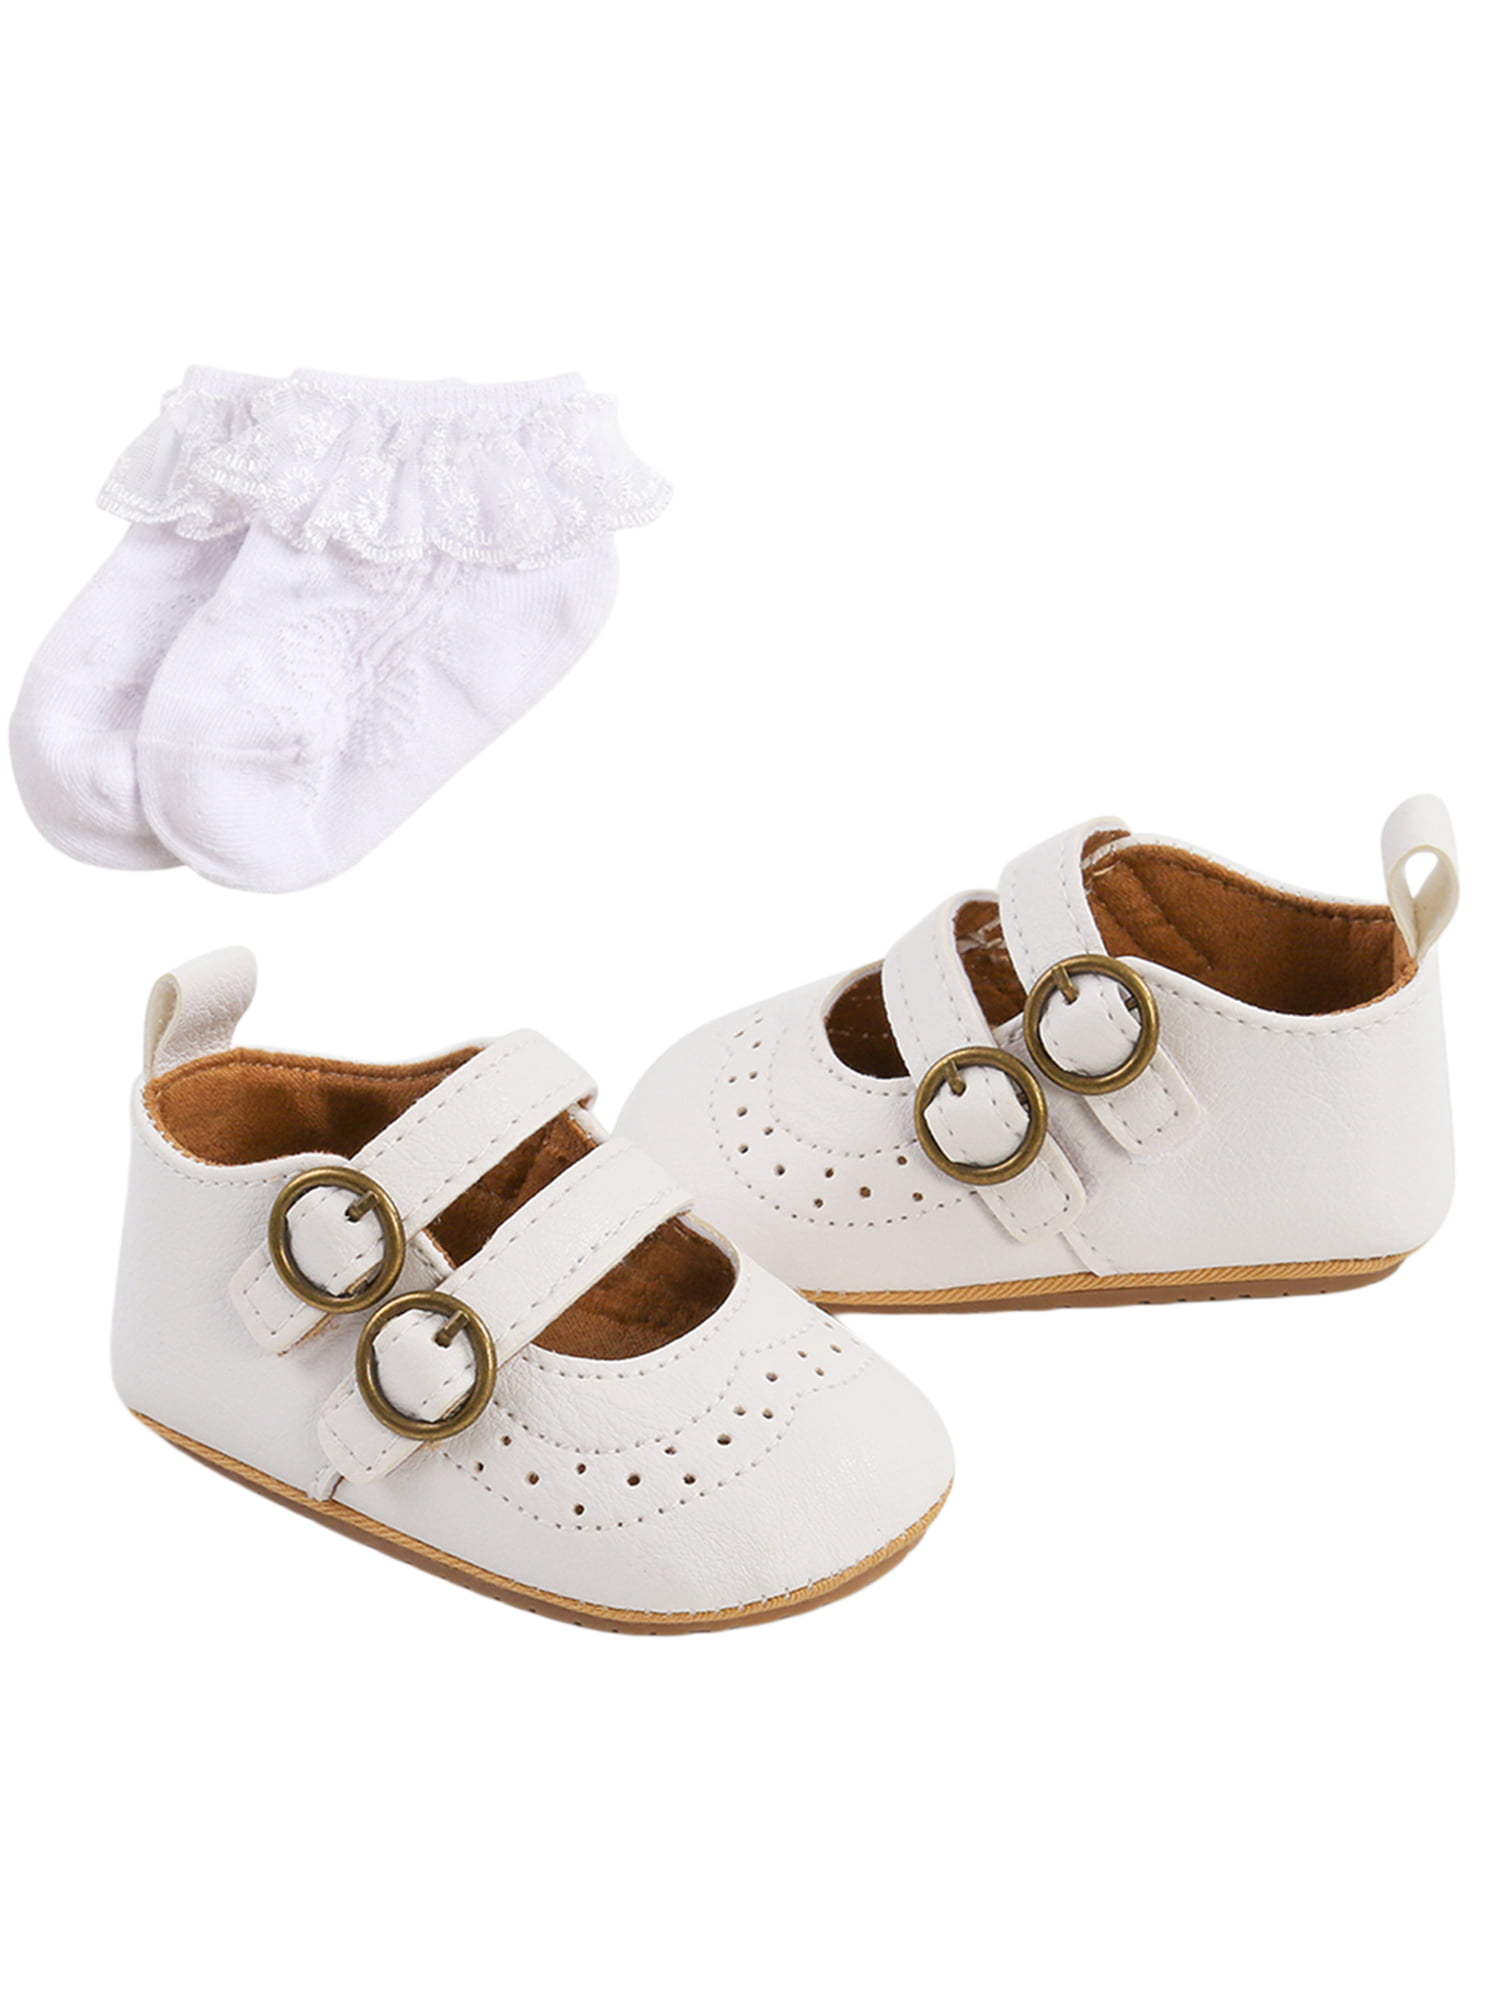 Girls Party Wedding Bridesmaids Christening Shoes Buckle Infants 1 2 3 4 5 6 7 8